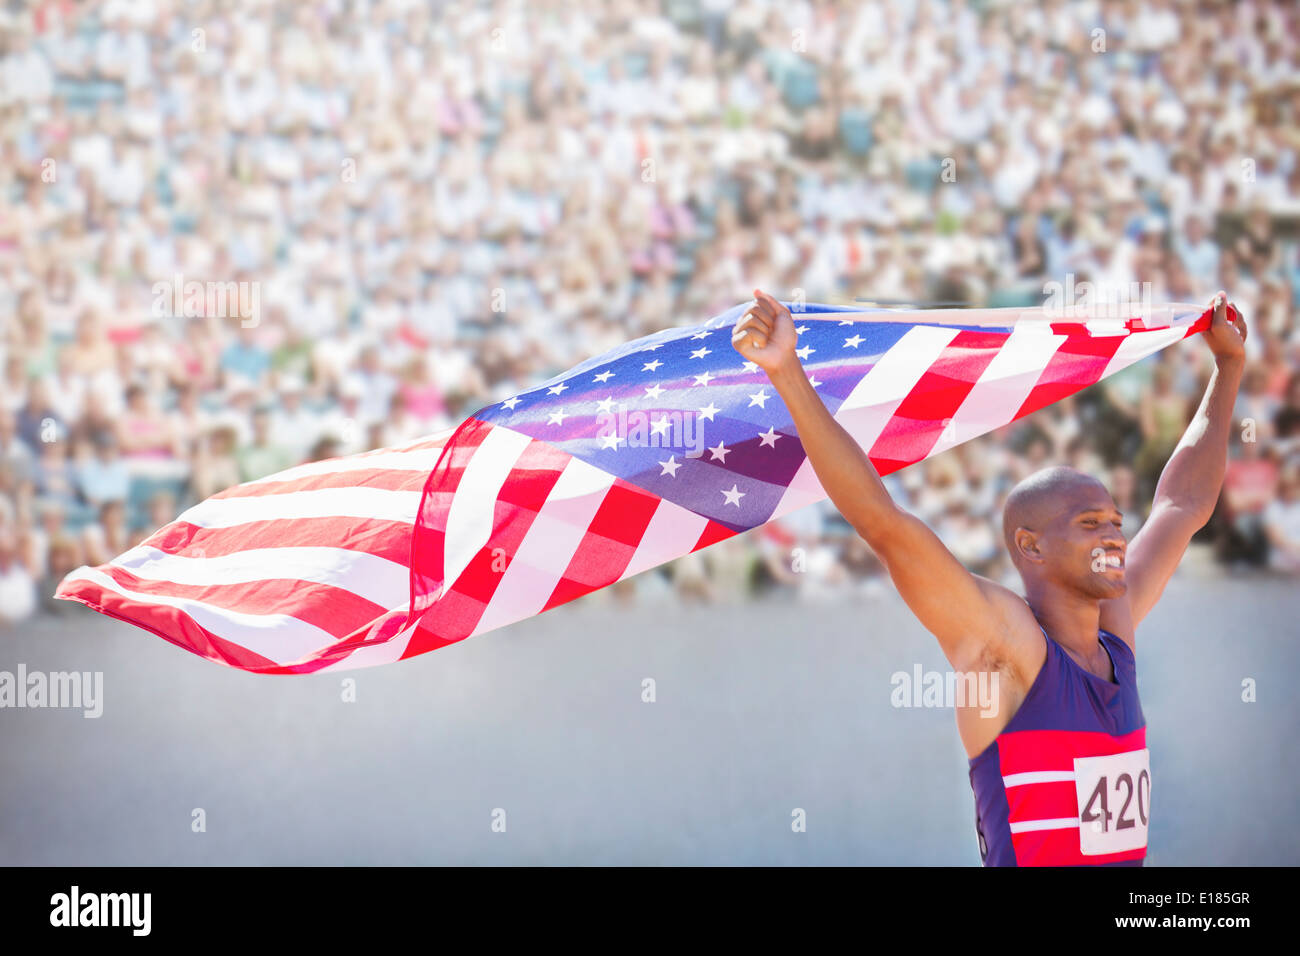 Athlétisme holding American flag in stadium Banque D'Images